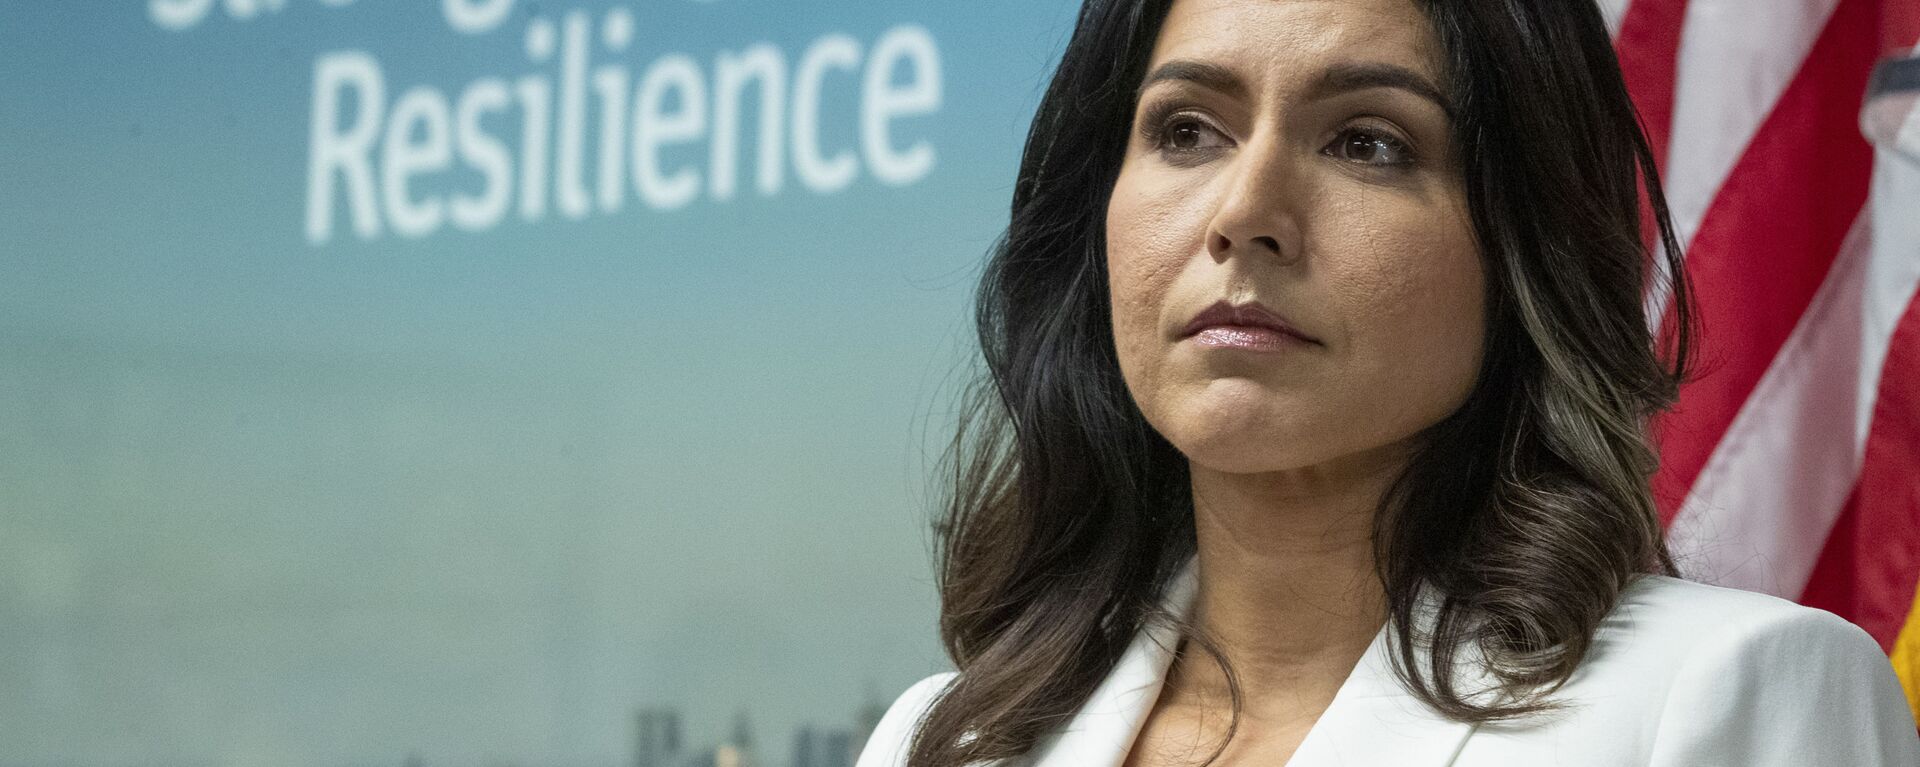 Democratic presidential candidate U.S. Rep. Tulsi Gabbard, D-Hawaii, listens as family members of victims of the terrorist attacks on 9/11 speak during a news conference at the 9/11 Tribute Museum, Tuesday, Oct. 29, 2019, in New York. - Sputnik International, 1920, 13.02.2022